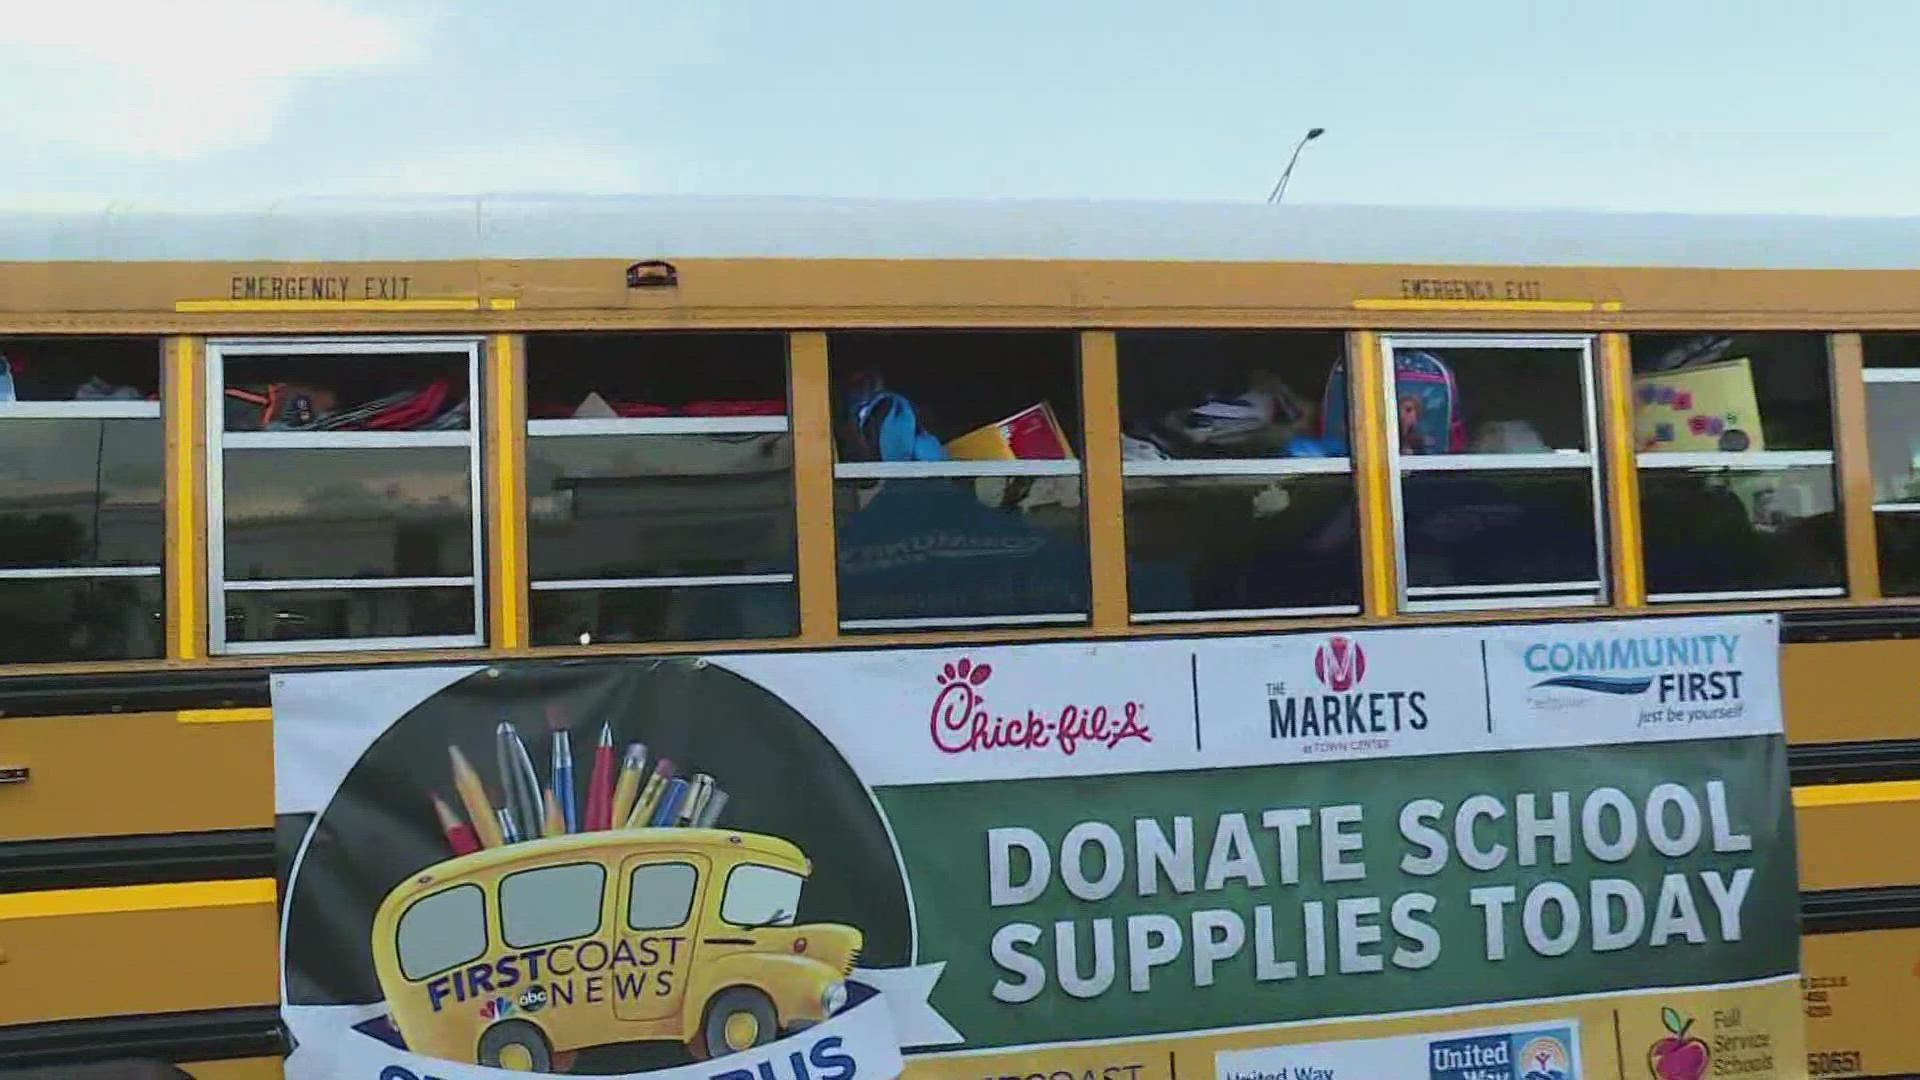 The donations have been pouring in for First Coast News' Stuff The Bus event.